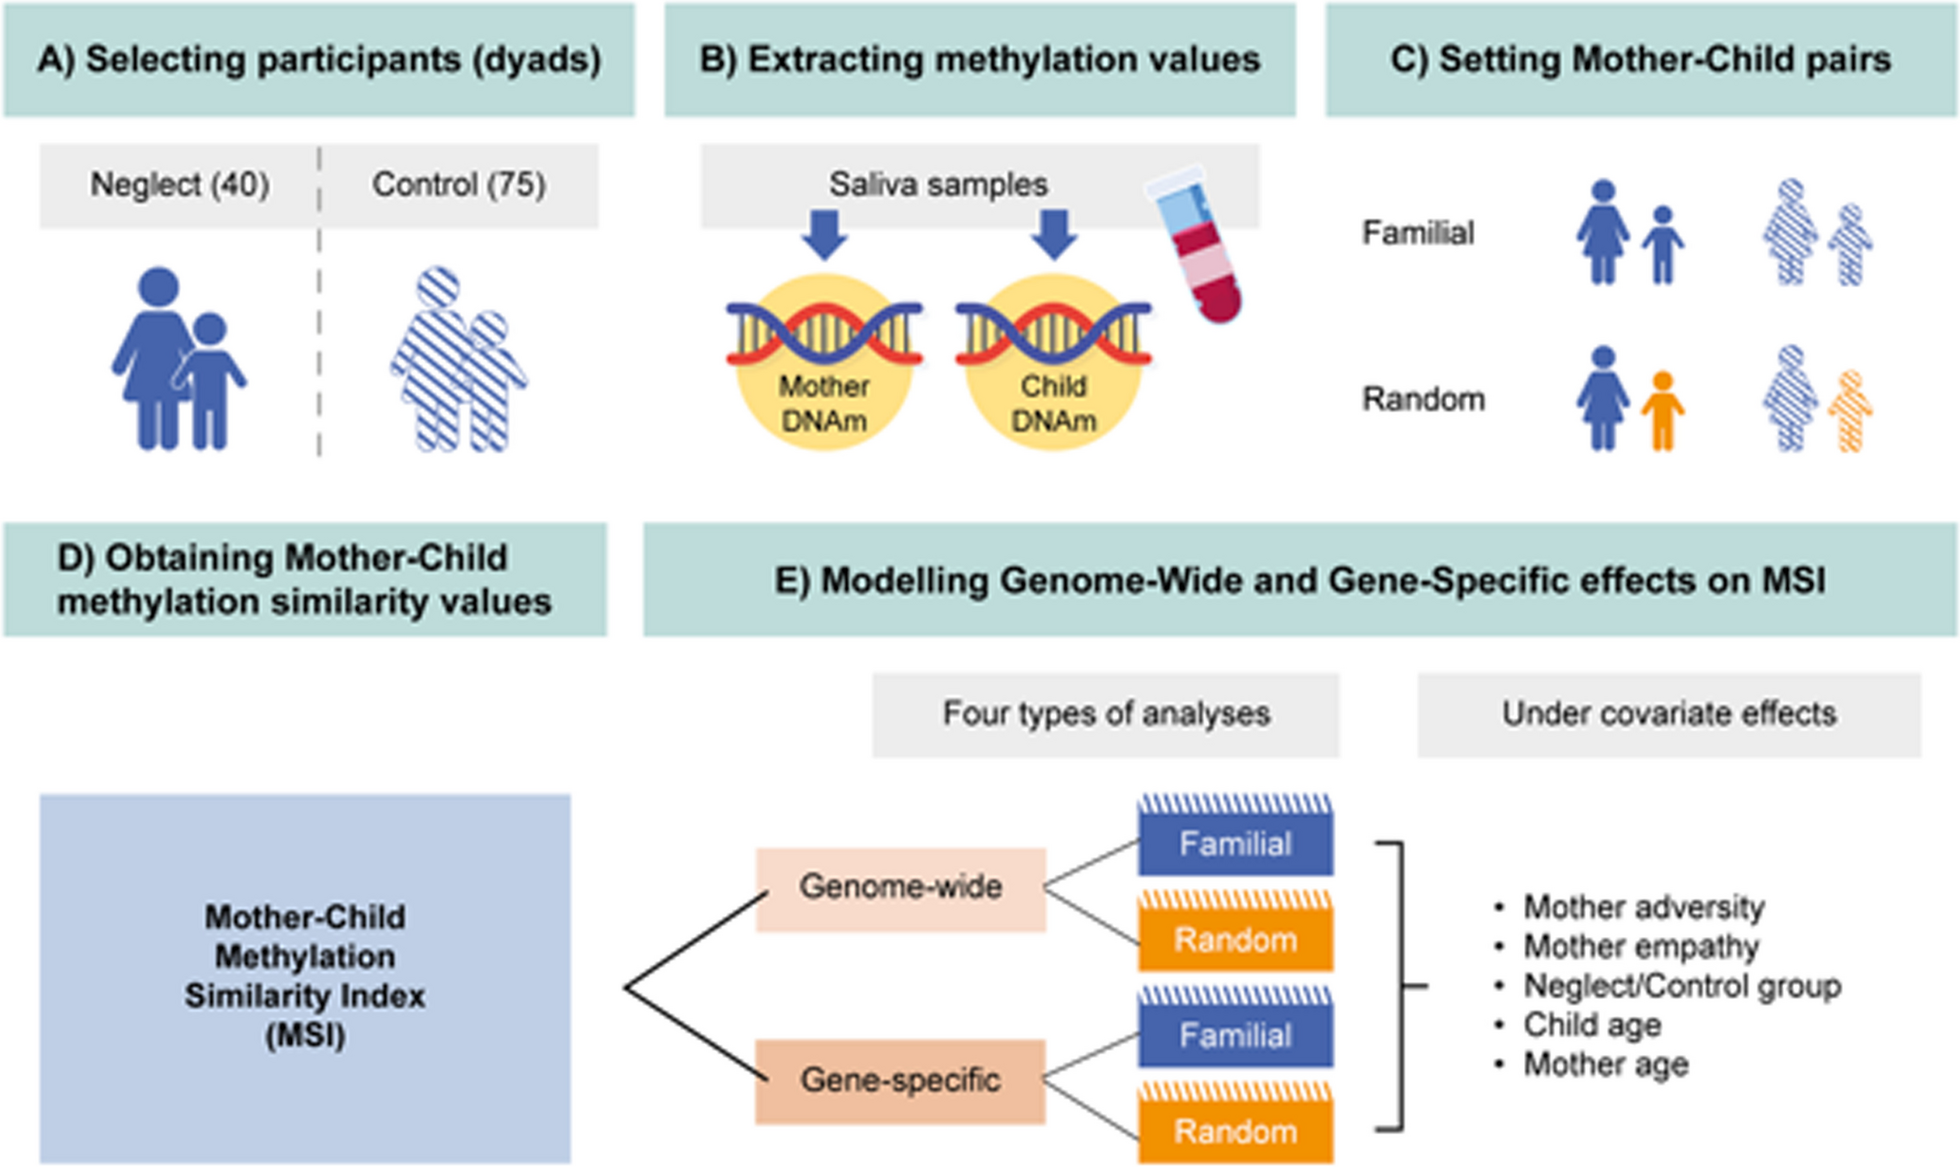 Mother adversity and co-residence time impact mother–child similarity in genome-wide and gene-specific methylation profiles